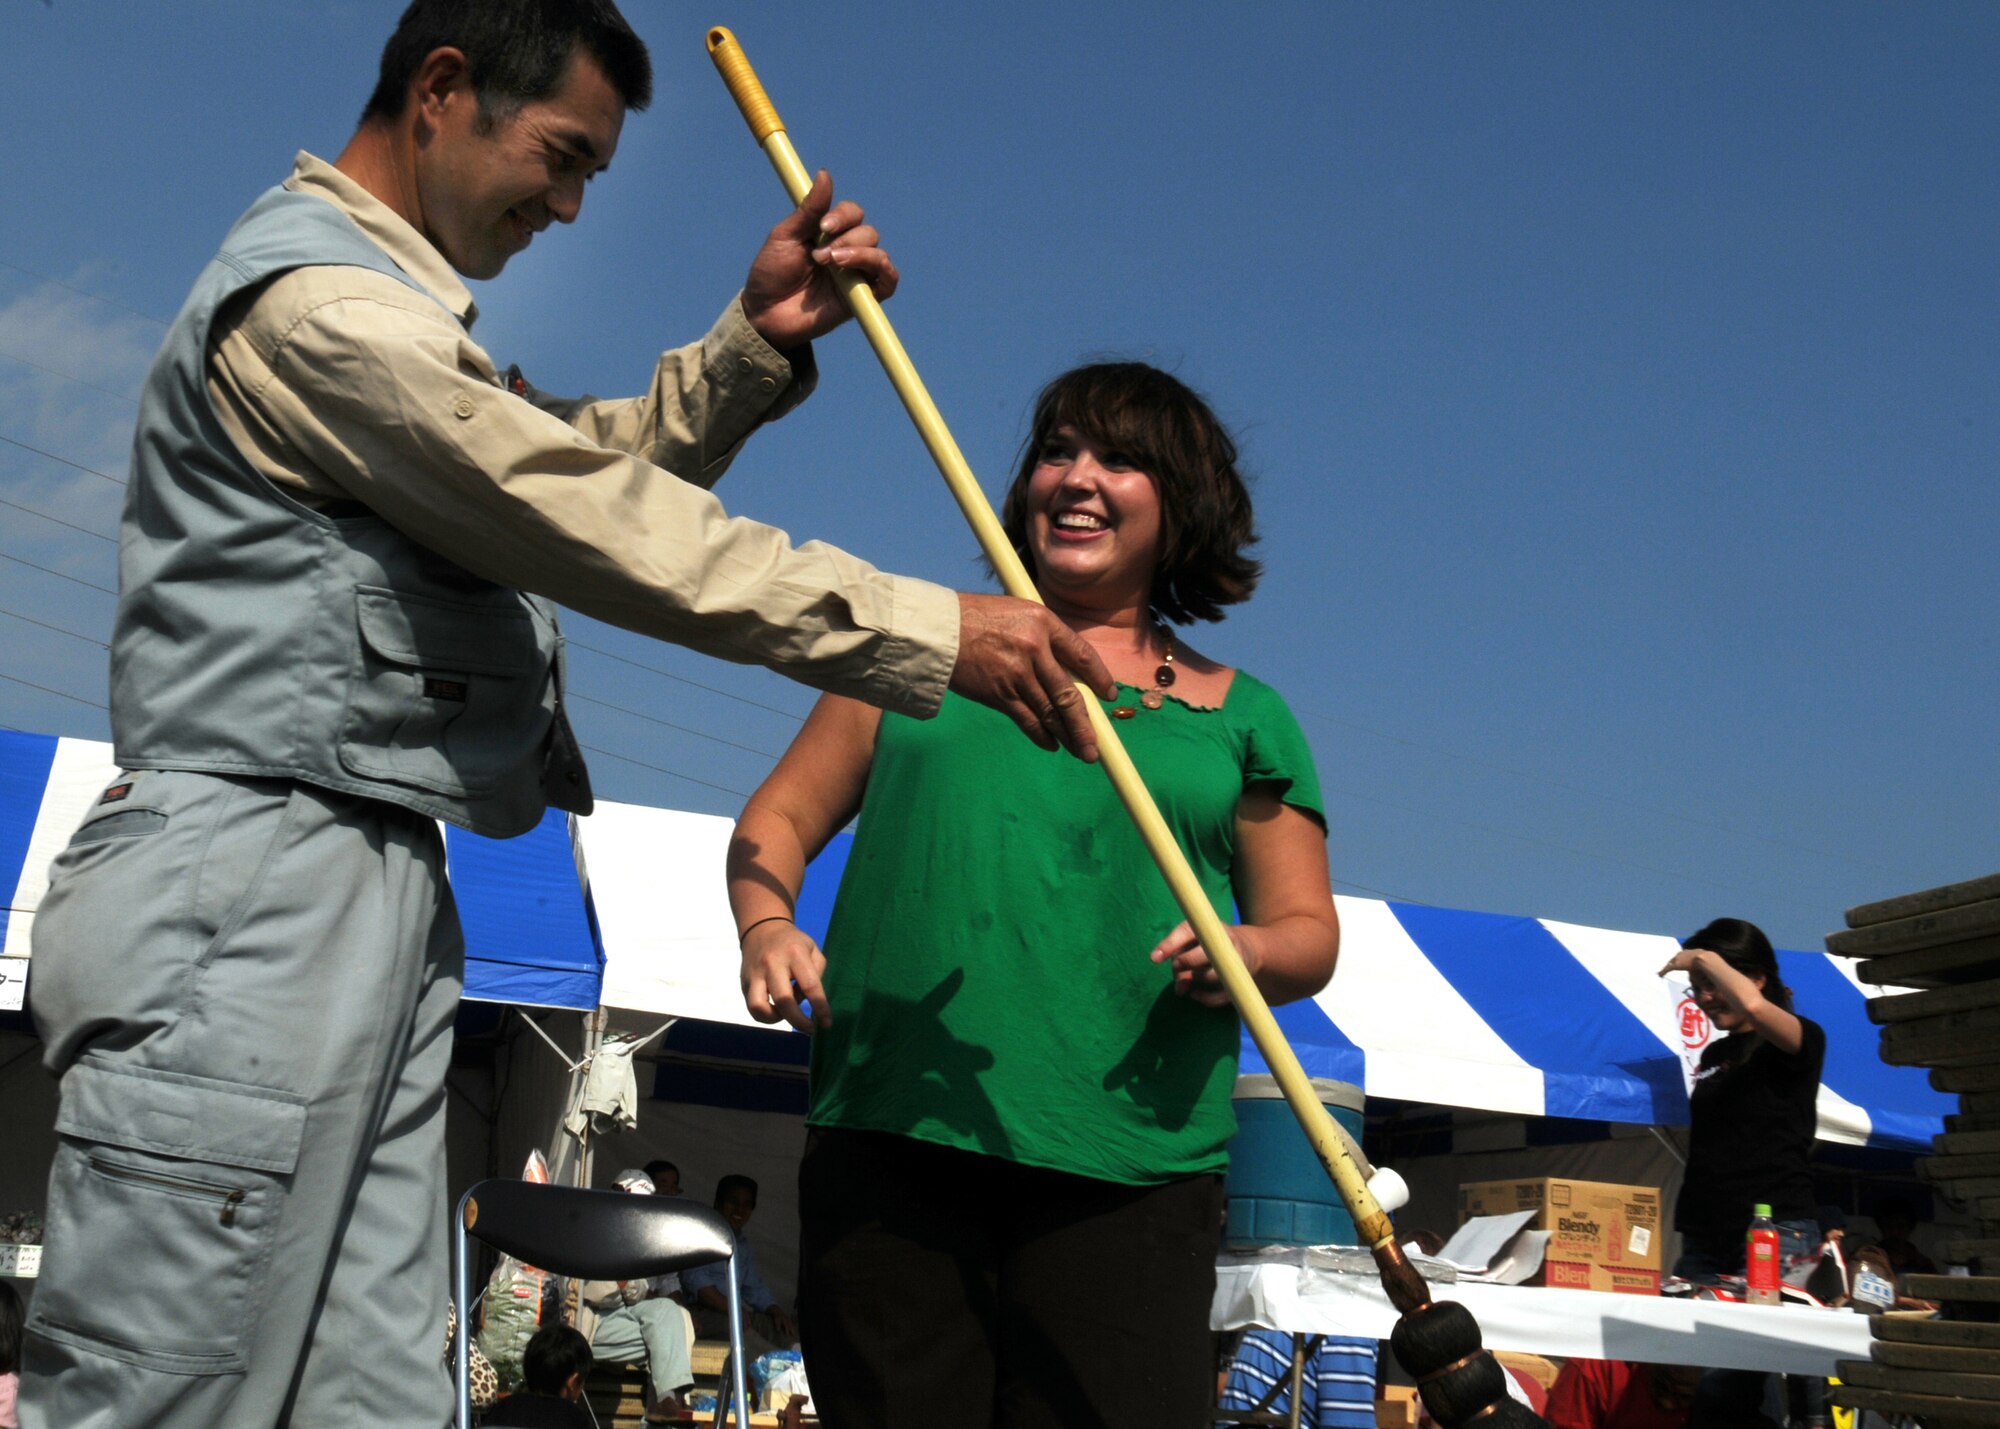 Mr. Masanori Kobashi shows Ms. Beth Gosselin, Chief of Public Affairs Operations at Kadena Air Base, Japan, how to paint her name with a hitofudegaki (large paint brush) at a local farm festival during their visit to Hyakuri Air Base, Japan, Oct. 04. The squadron is participating in an Aviation Training Relocation exercise between the U.S. Air Force and the Japan Air Self Defense Force from Oct. 5-9, 2009.